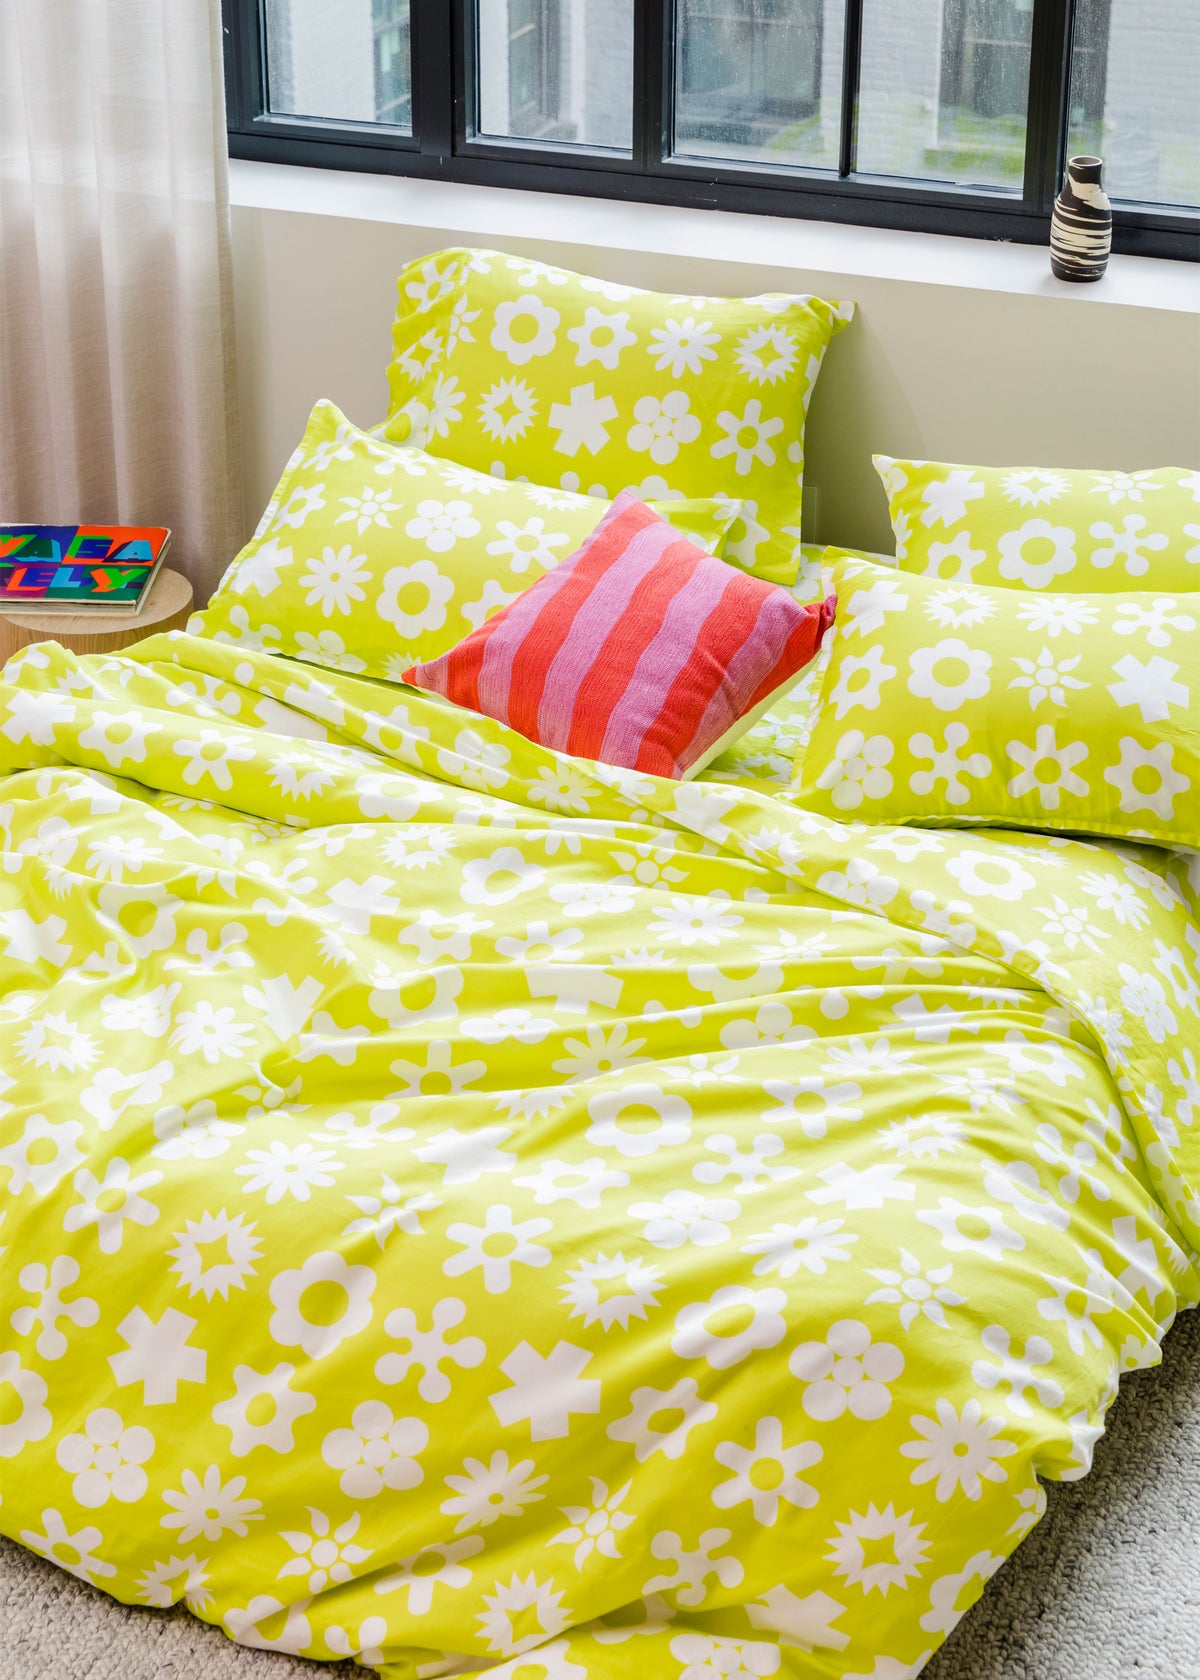 Dusen Dusen Yellow Wingding Duvet and Sheet Sets in chartreuse and white Wingdings print. Include an individual Flat Sheet to round out a Sheet Set. 100% cotton sateen, 300 thread count. Machine wash cold and tumble dry. Made in Portugal.  Our cotton sateen is smooth and cool to the touch and features a slightly lustrous finish. The sateen softens further with every wash;